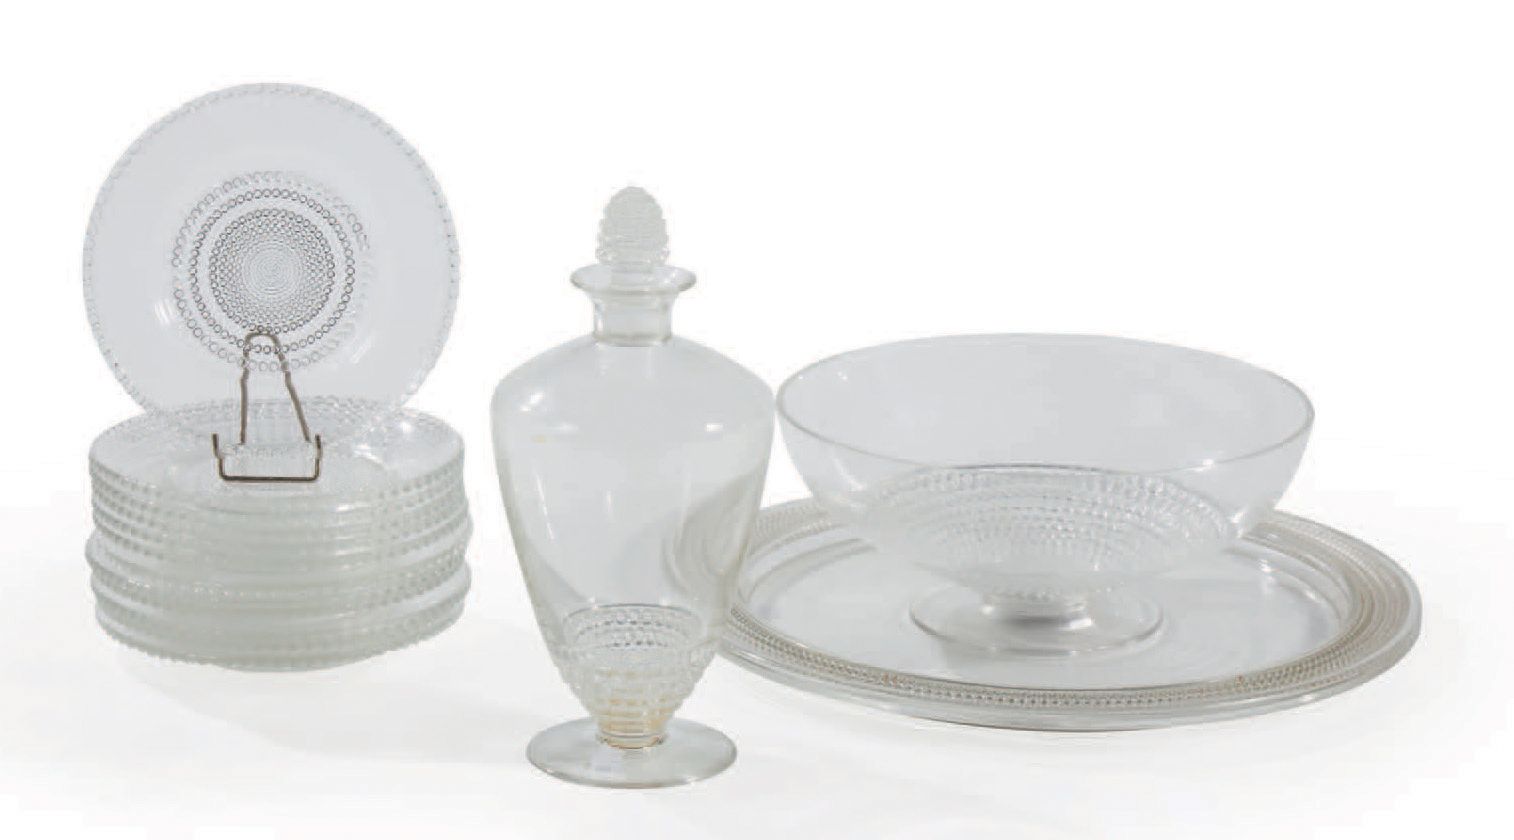 RENE LALIQUE (1860-1945) 
Glass service set "Nippon" model including a cup, a ca&hellip;